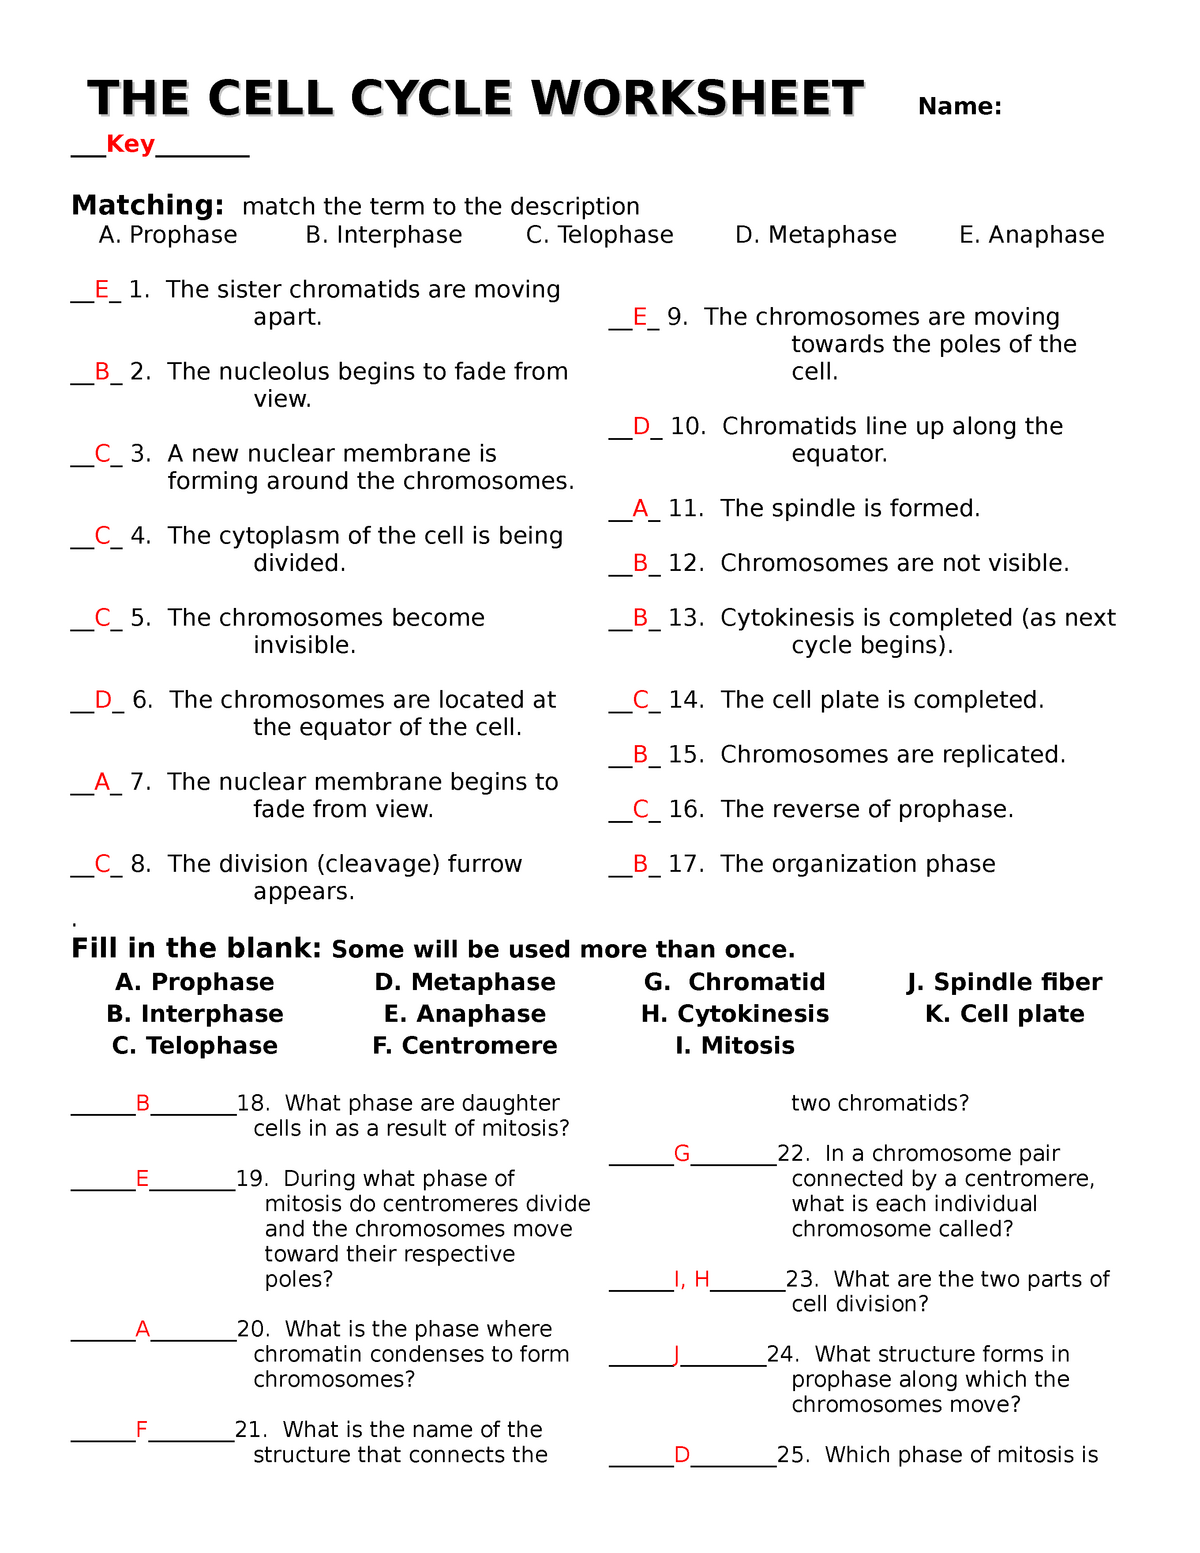 The-cell-cycle-worksheet with answers - BIOG-20 - Explorations in In Cell Division Worksheet Answers